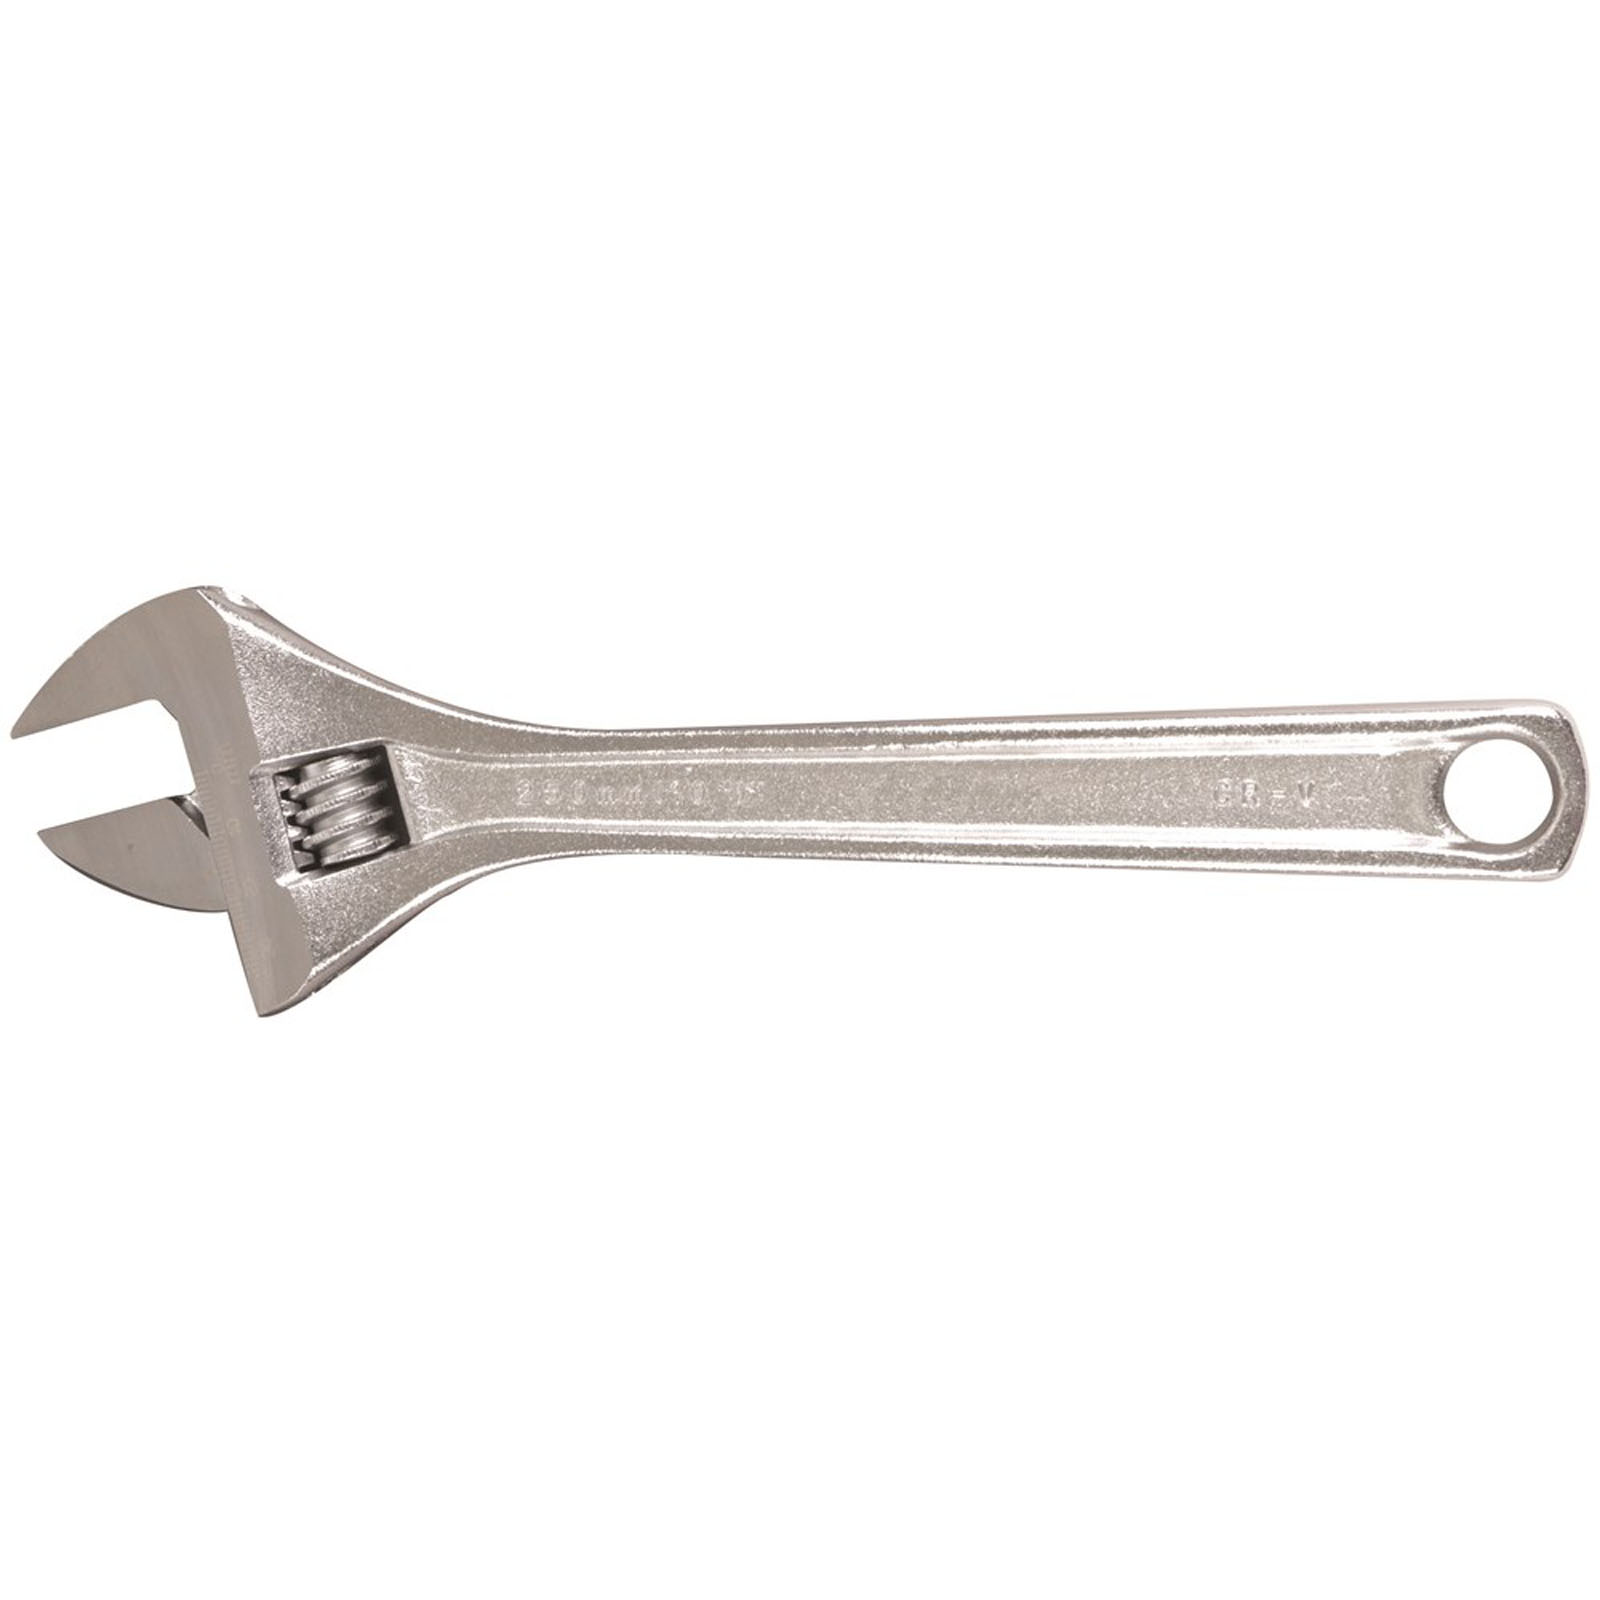 Adjustable Wrench 100mm (4